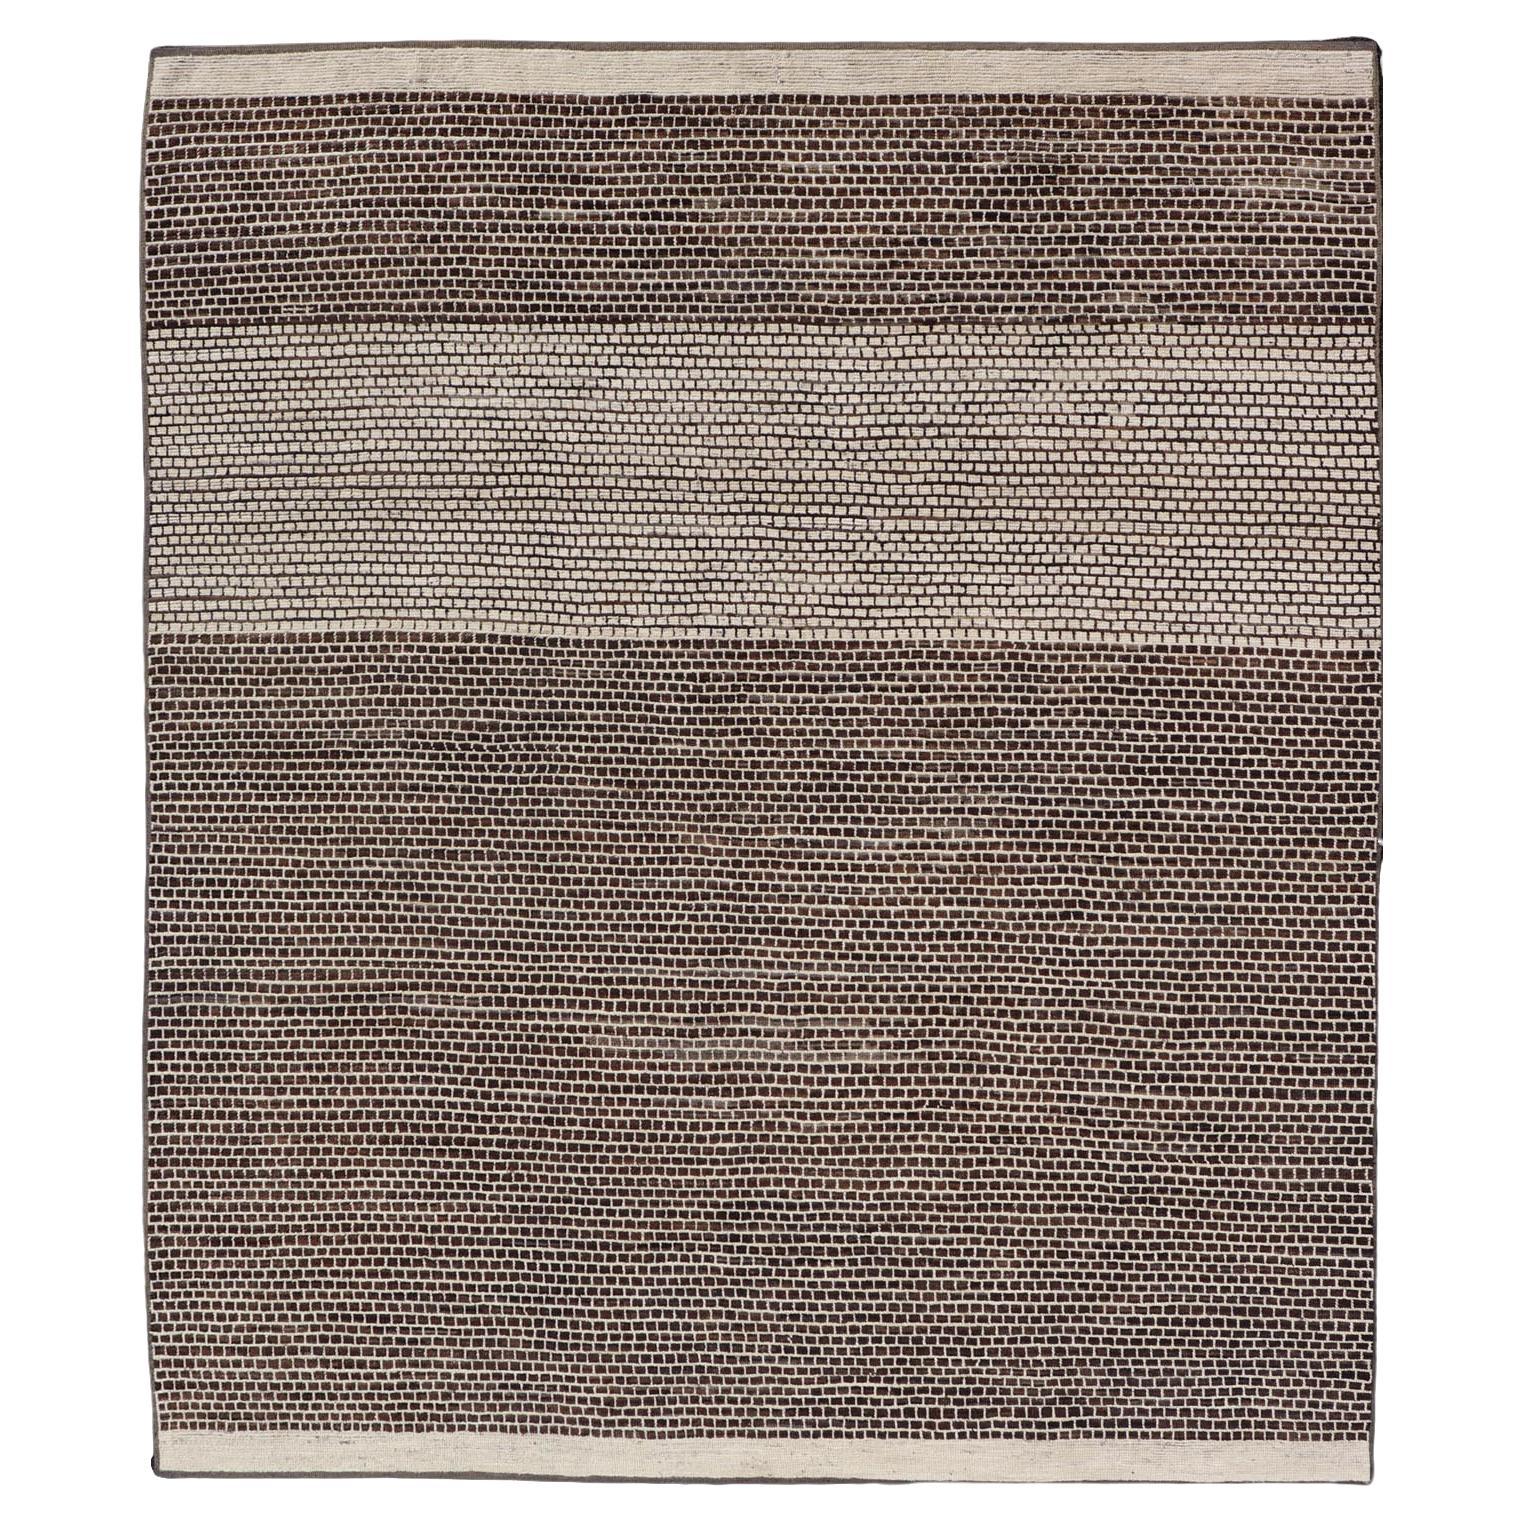 Modern Rug with Geometric Brick Design in Earthy Tones of Brown's, and Cream